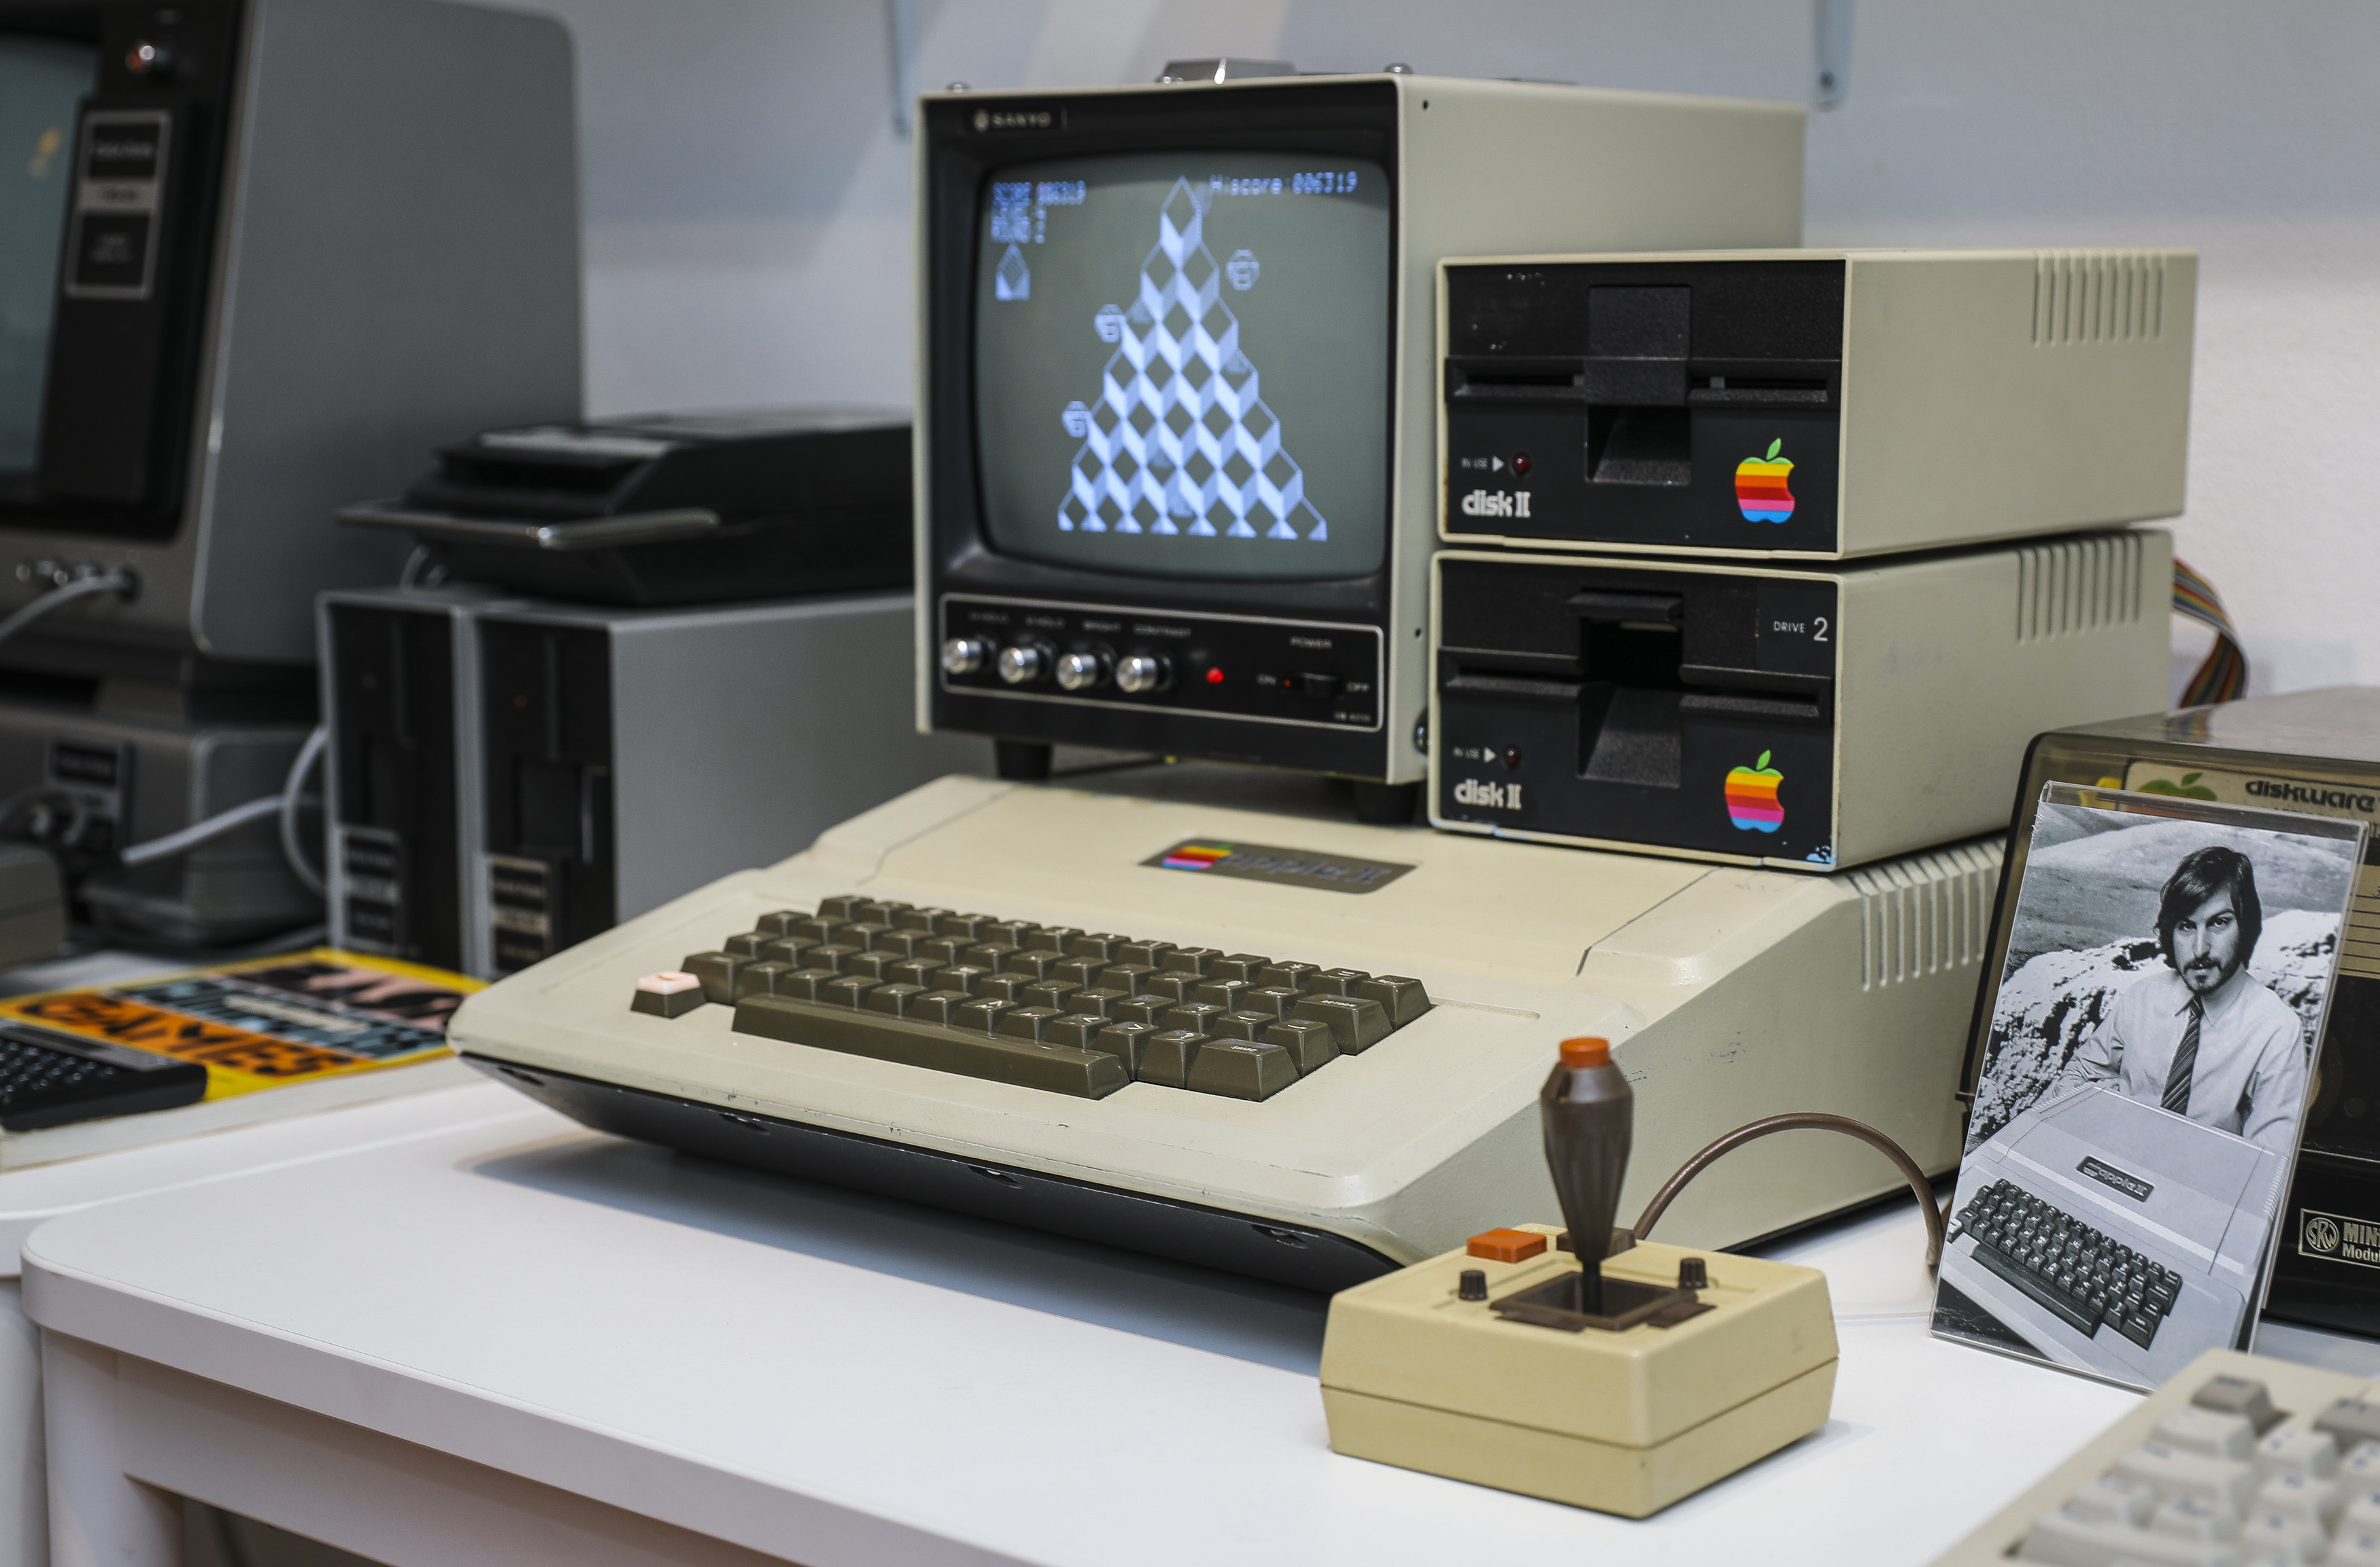 The BYTE Shop's collection includes this Apple II computer. The shop also offers electronics repair, resale, and recycling. 